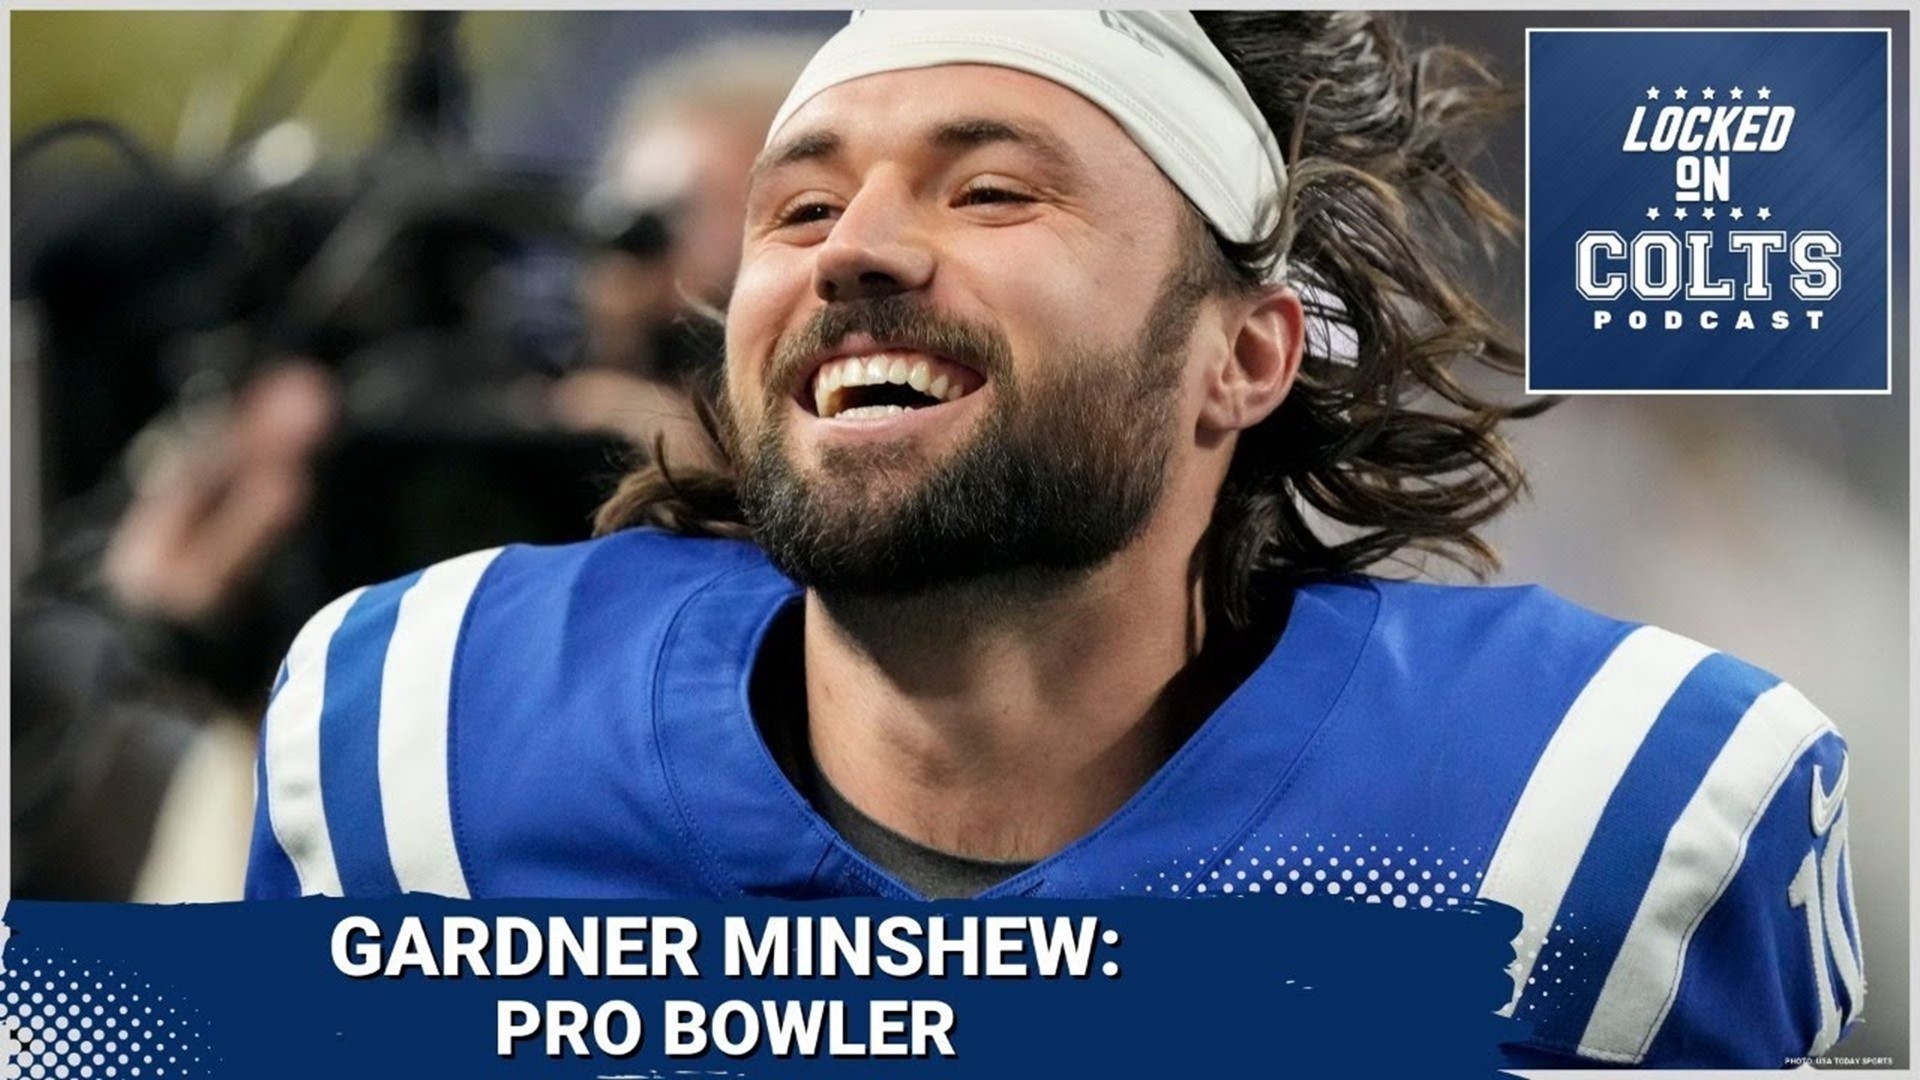 Three Indianapolis Colts were added to the Pro Bowl, including Gardner Minshew, DeForest Buckner, and Ryan Kelly.